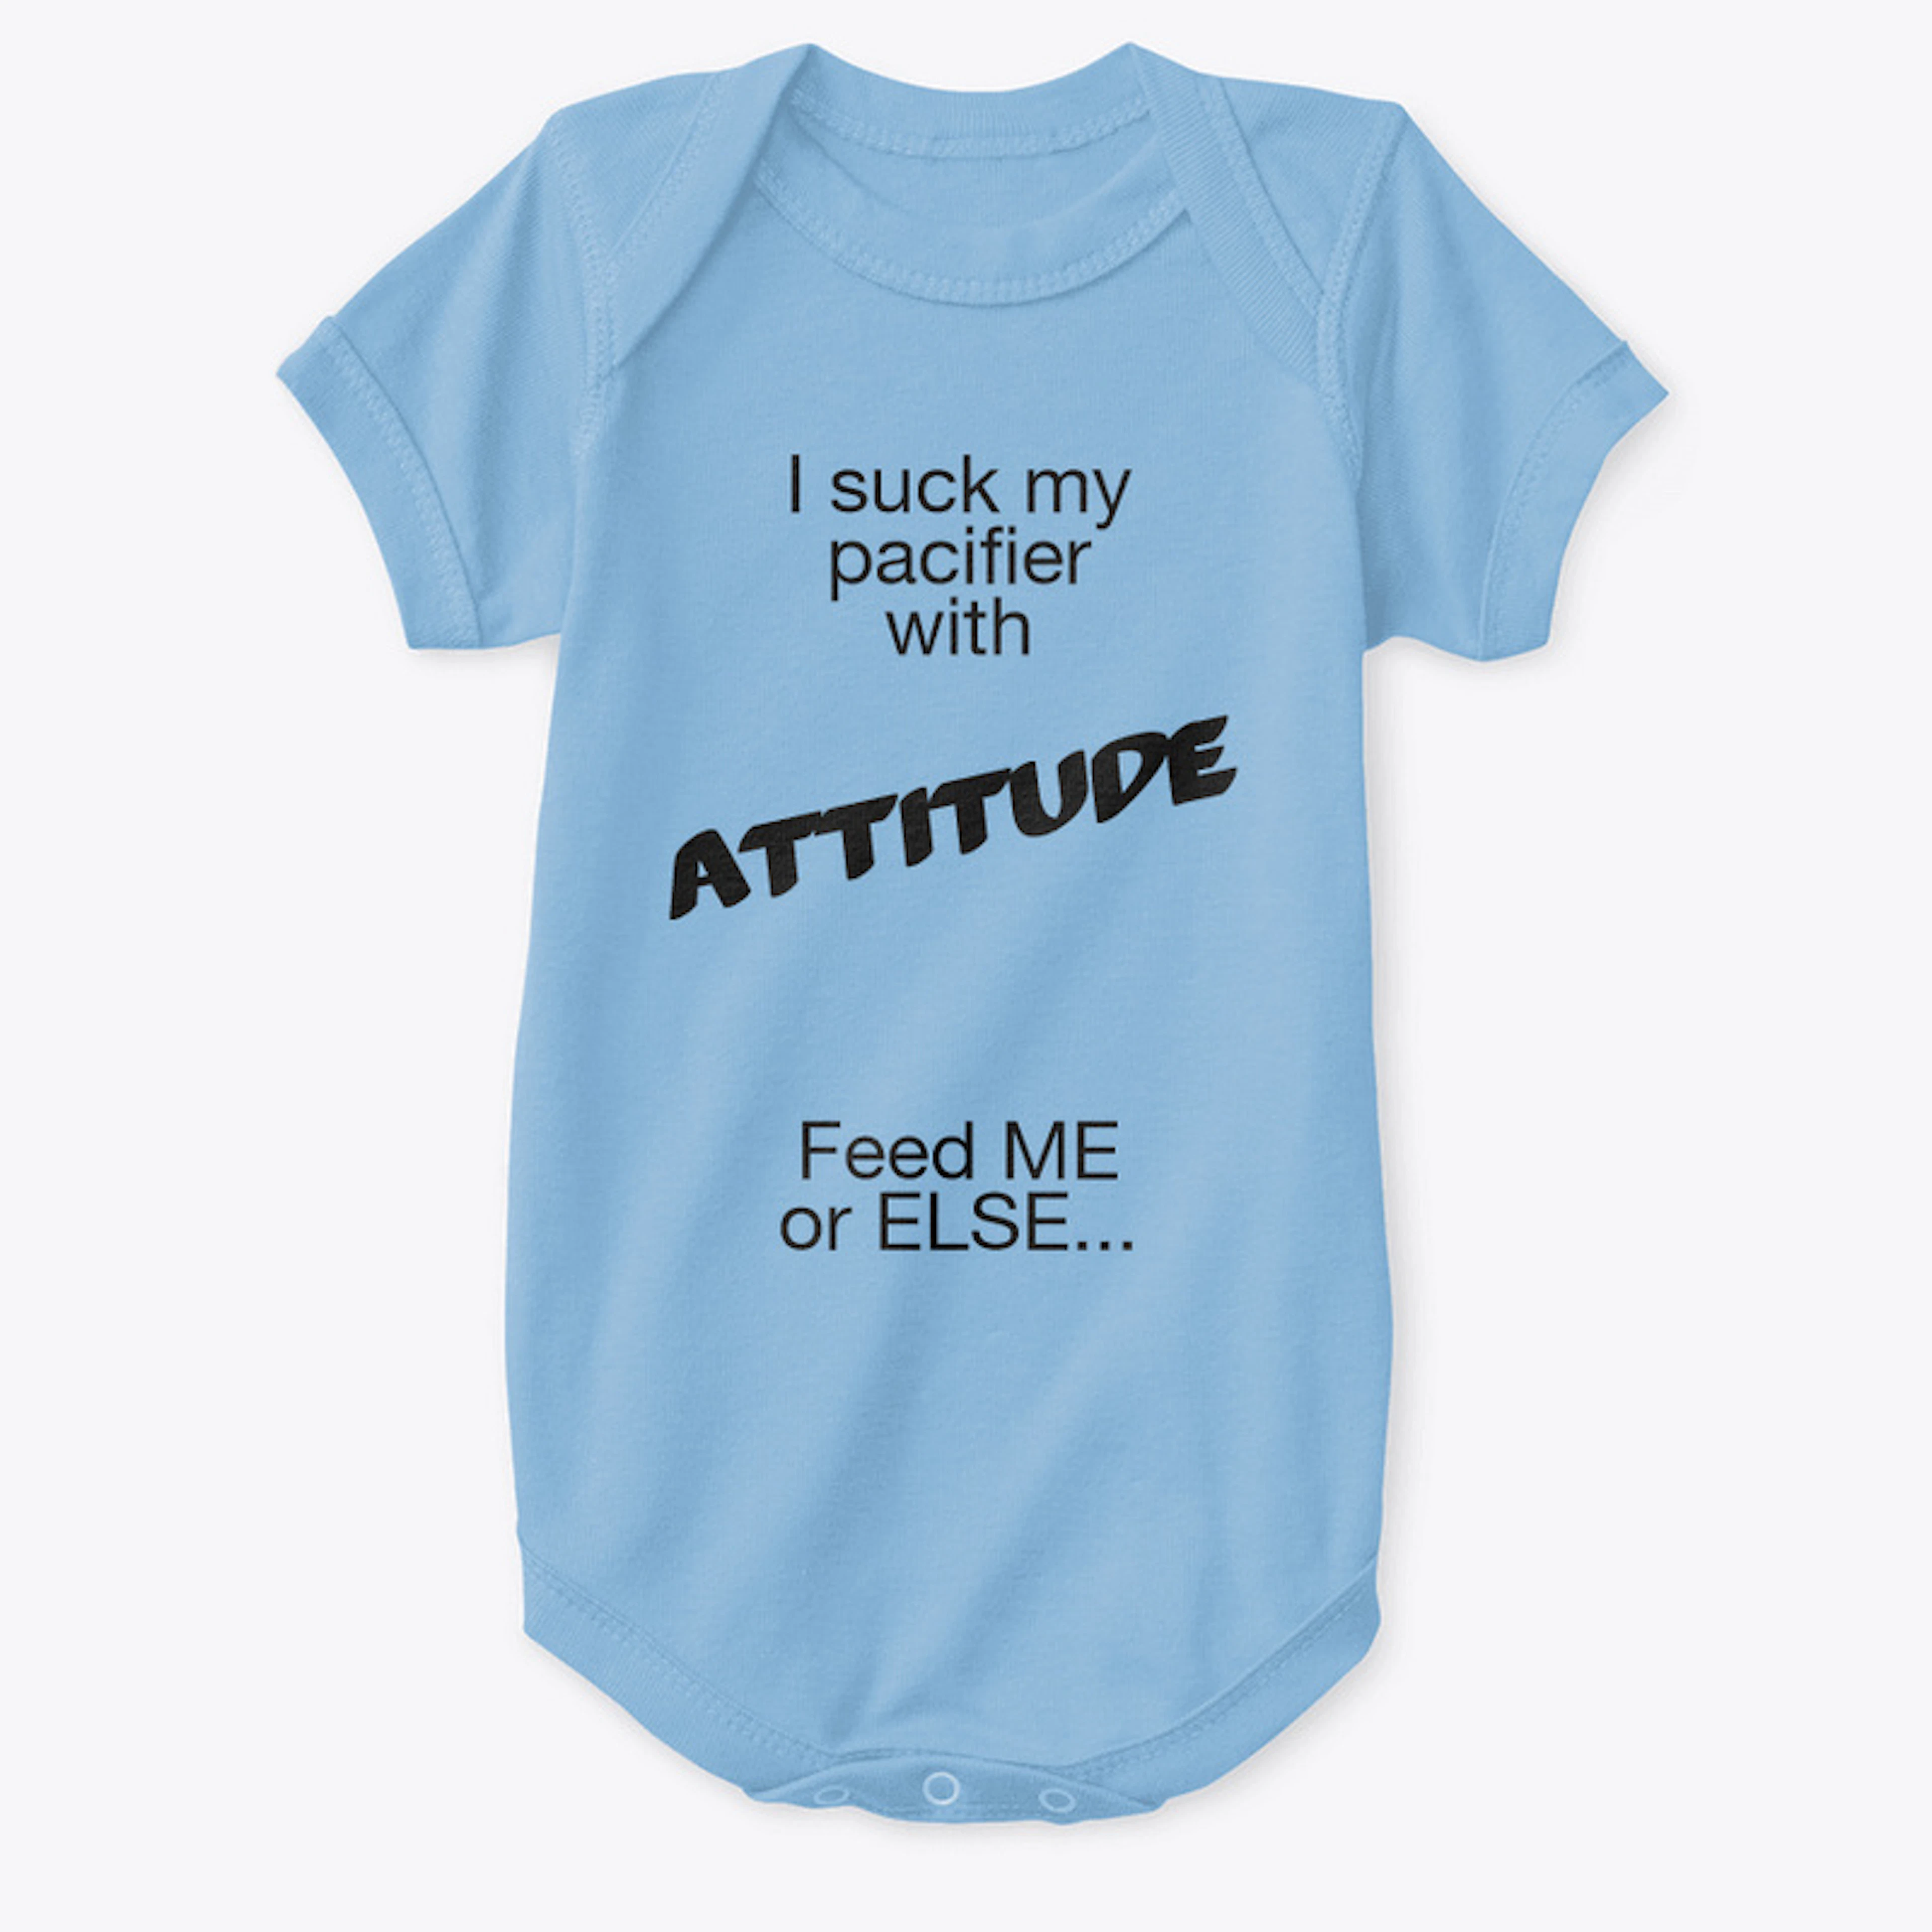 Attitude for babies